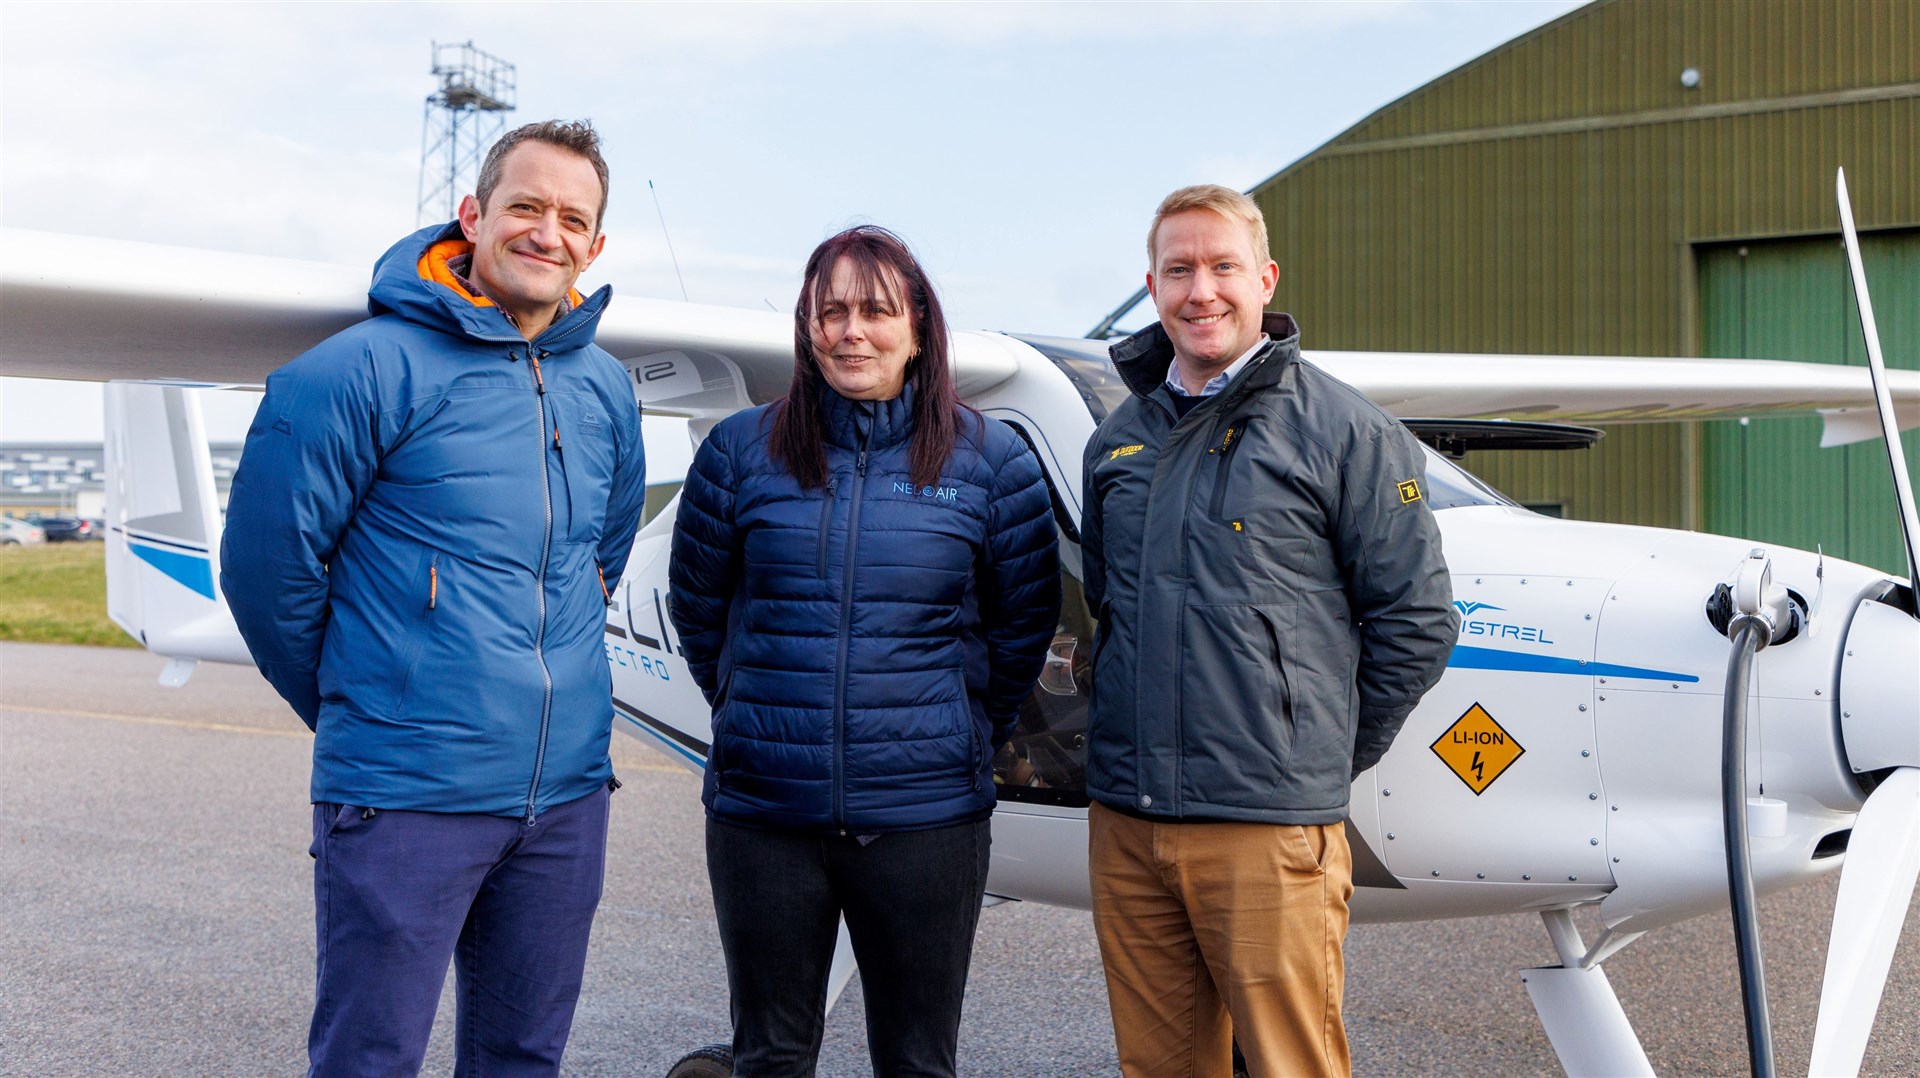 RAF Lossiemouth Station Commander, Group Captain Jim Lee, NEBOAir Director, Kerry Wilmot and Officer-in-Charge Moray Flying Club, Squadron Leader David Taudevin, at the launch of the new electric aircraft. Picture RAF Lossiemouth Media Team